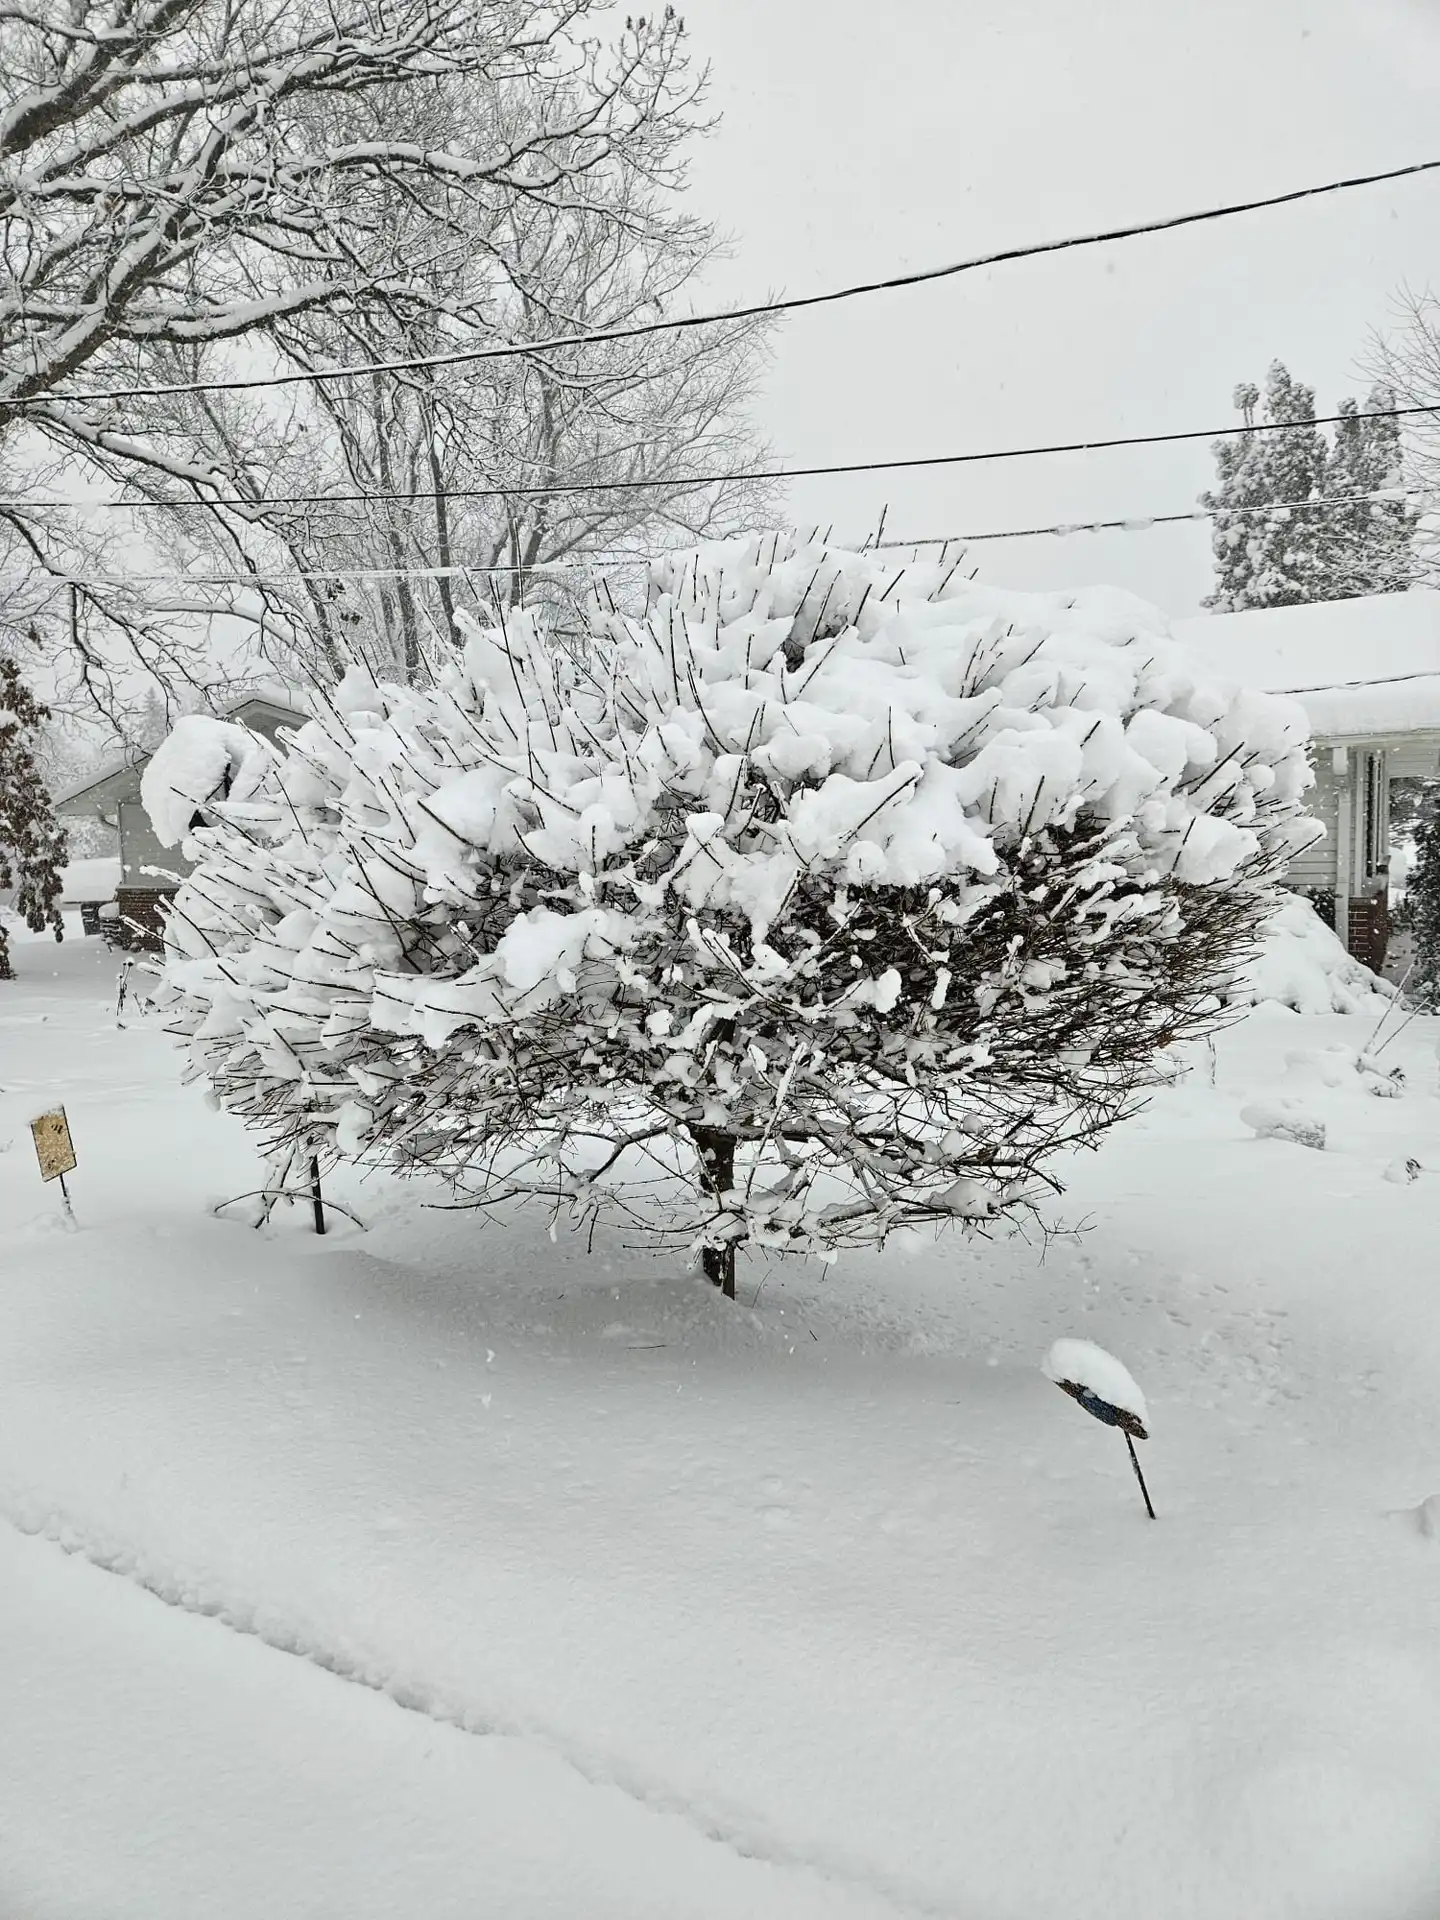 A snow-covered shrub stands prominently in a winter landscape, with a thick blanket of snow covering the ground and treetops, in a residential area.